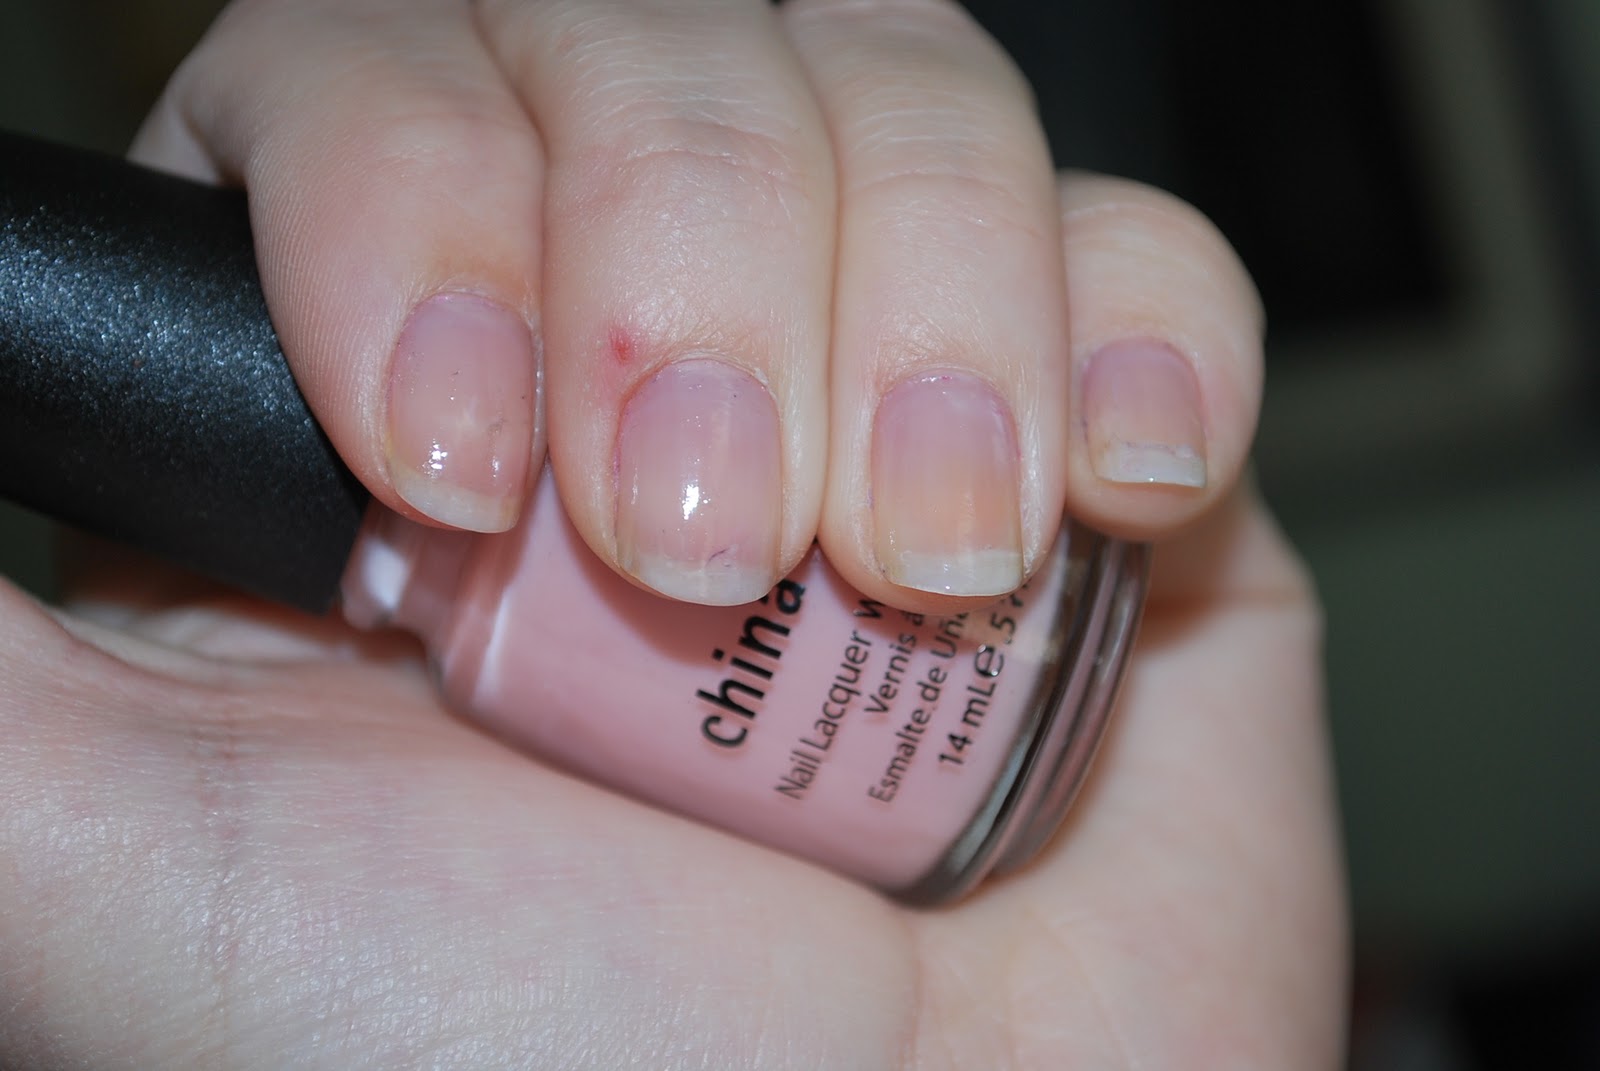 6. "China Glaze Nail Lacquer in Innocence" - wide 6